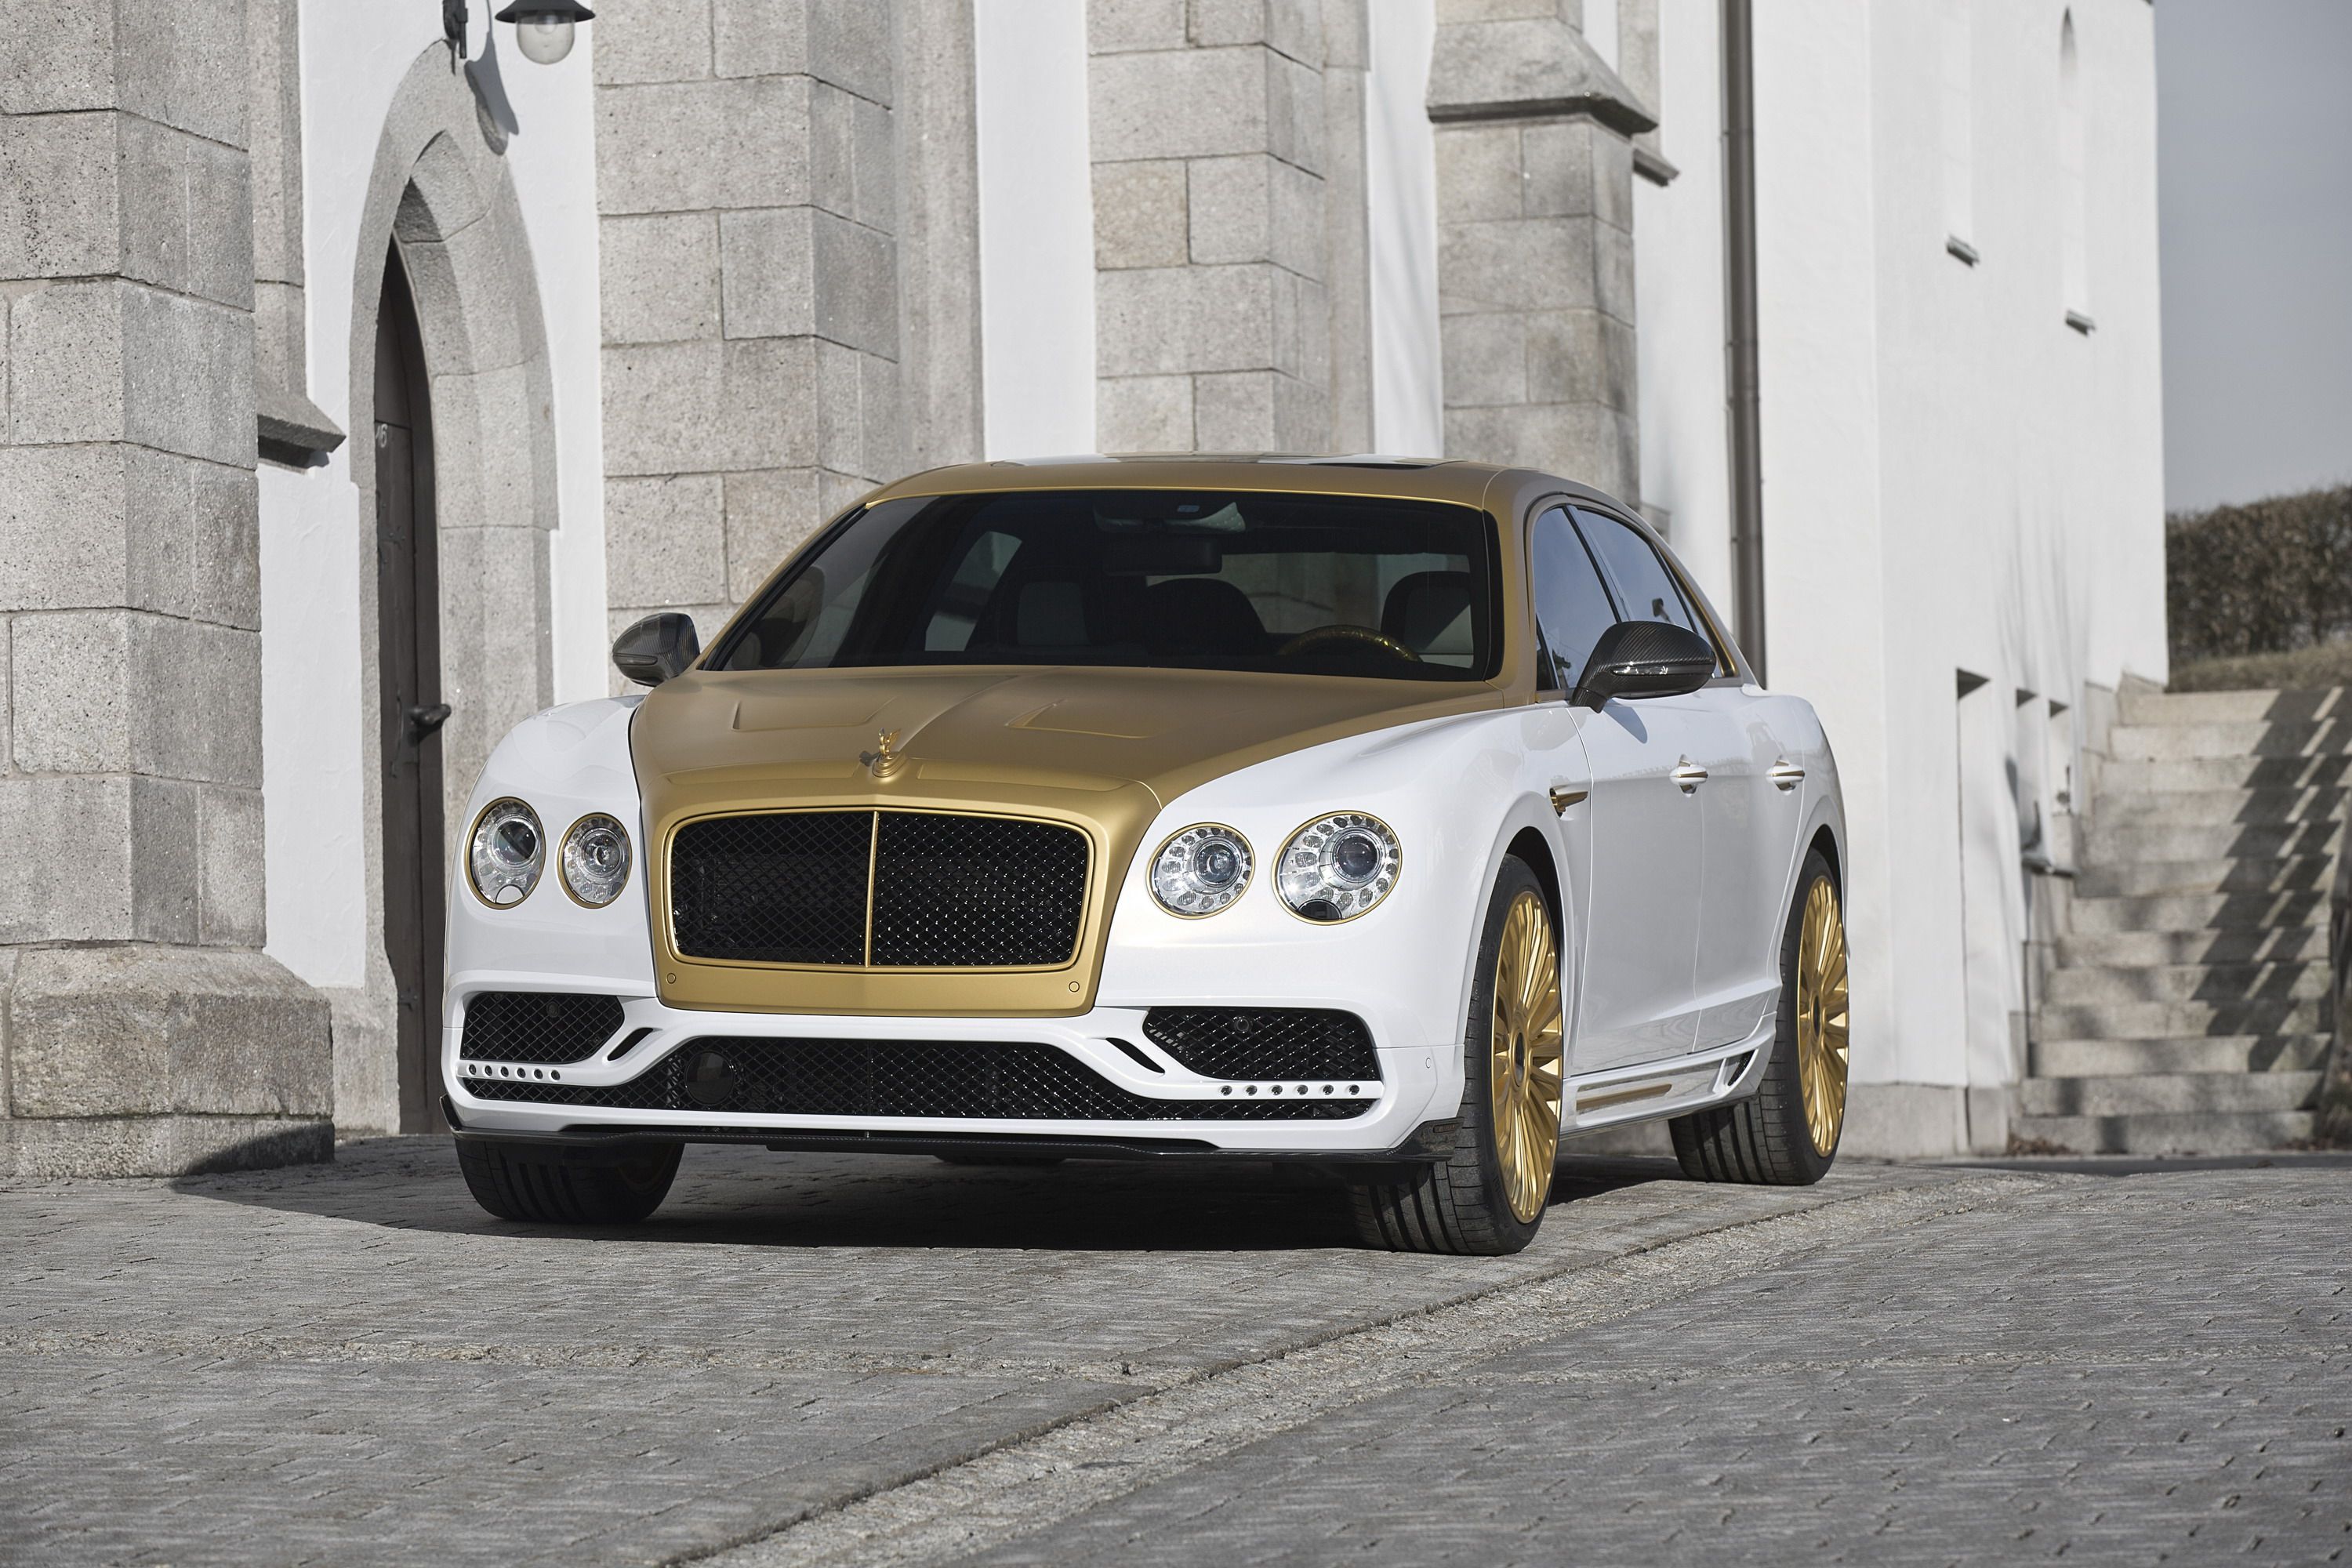 2016 Bentley Flying Spur by Mansory